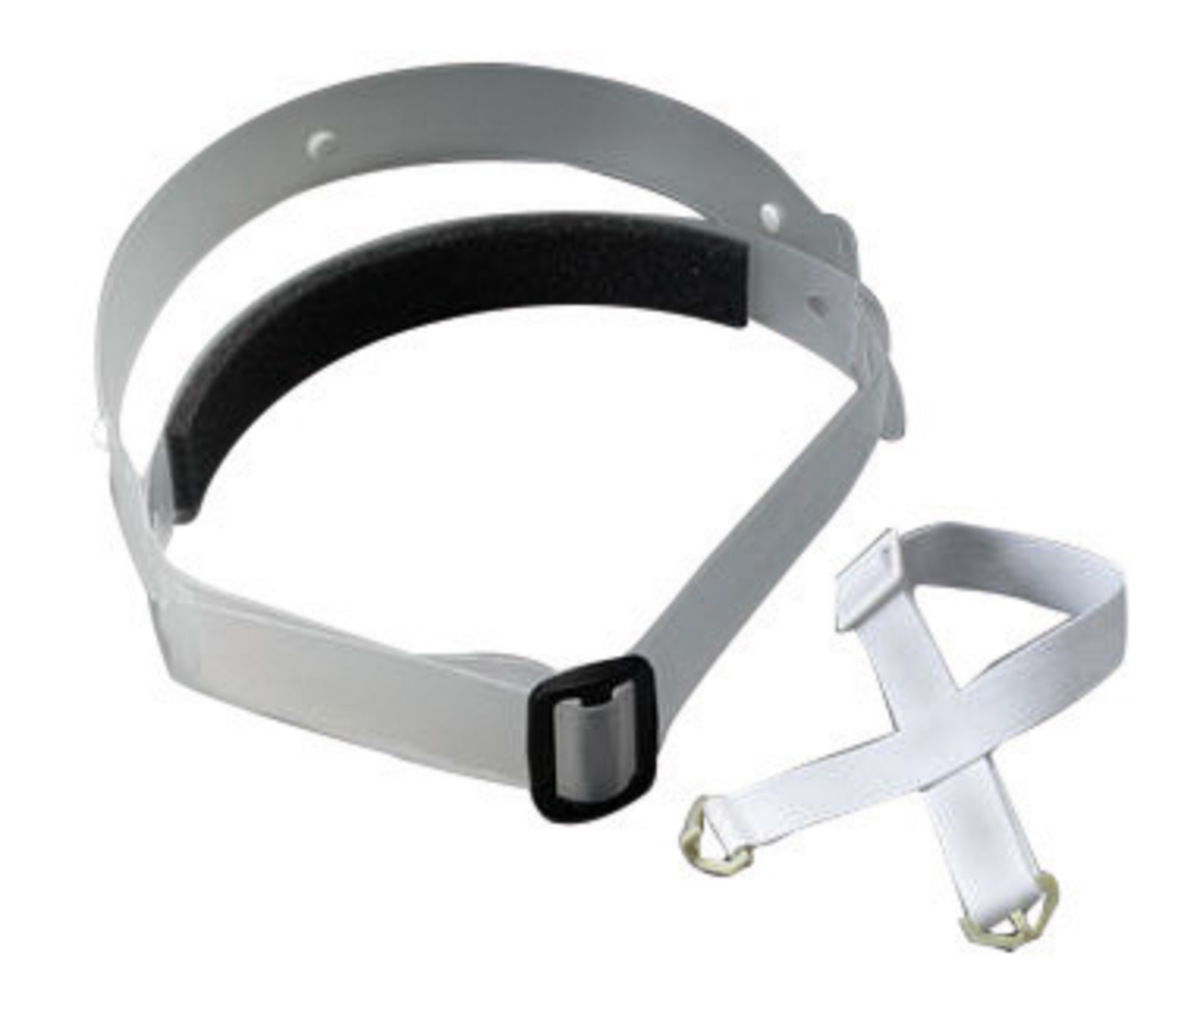 3M™ Snapcap Headband Assembly With W-2913 Chin Strap (For Use With 3M™ W-3259 Snapcap Hood Assembly)